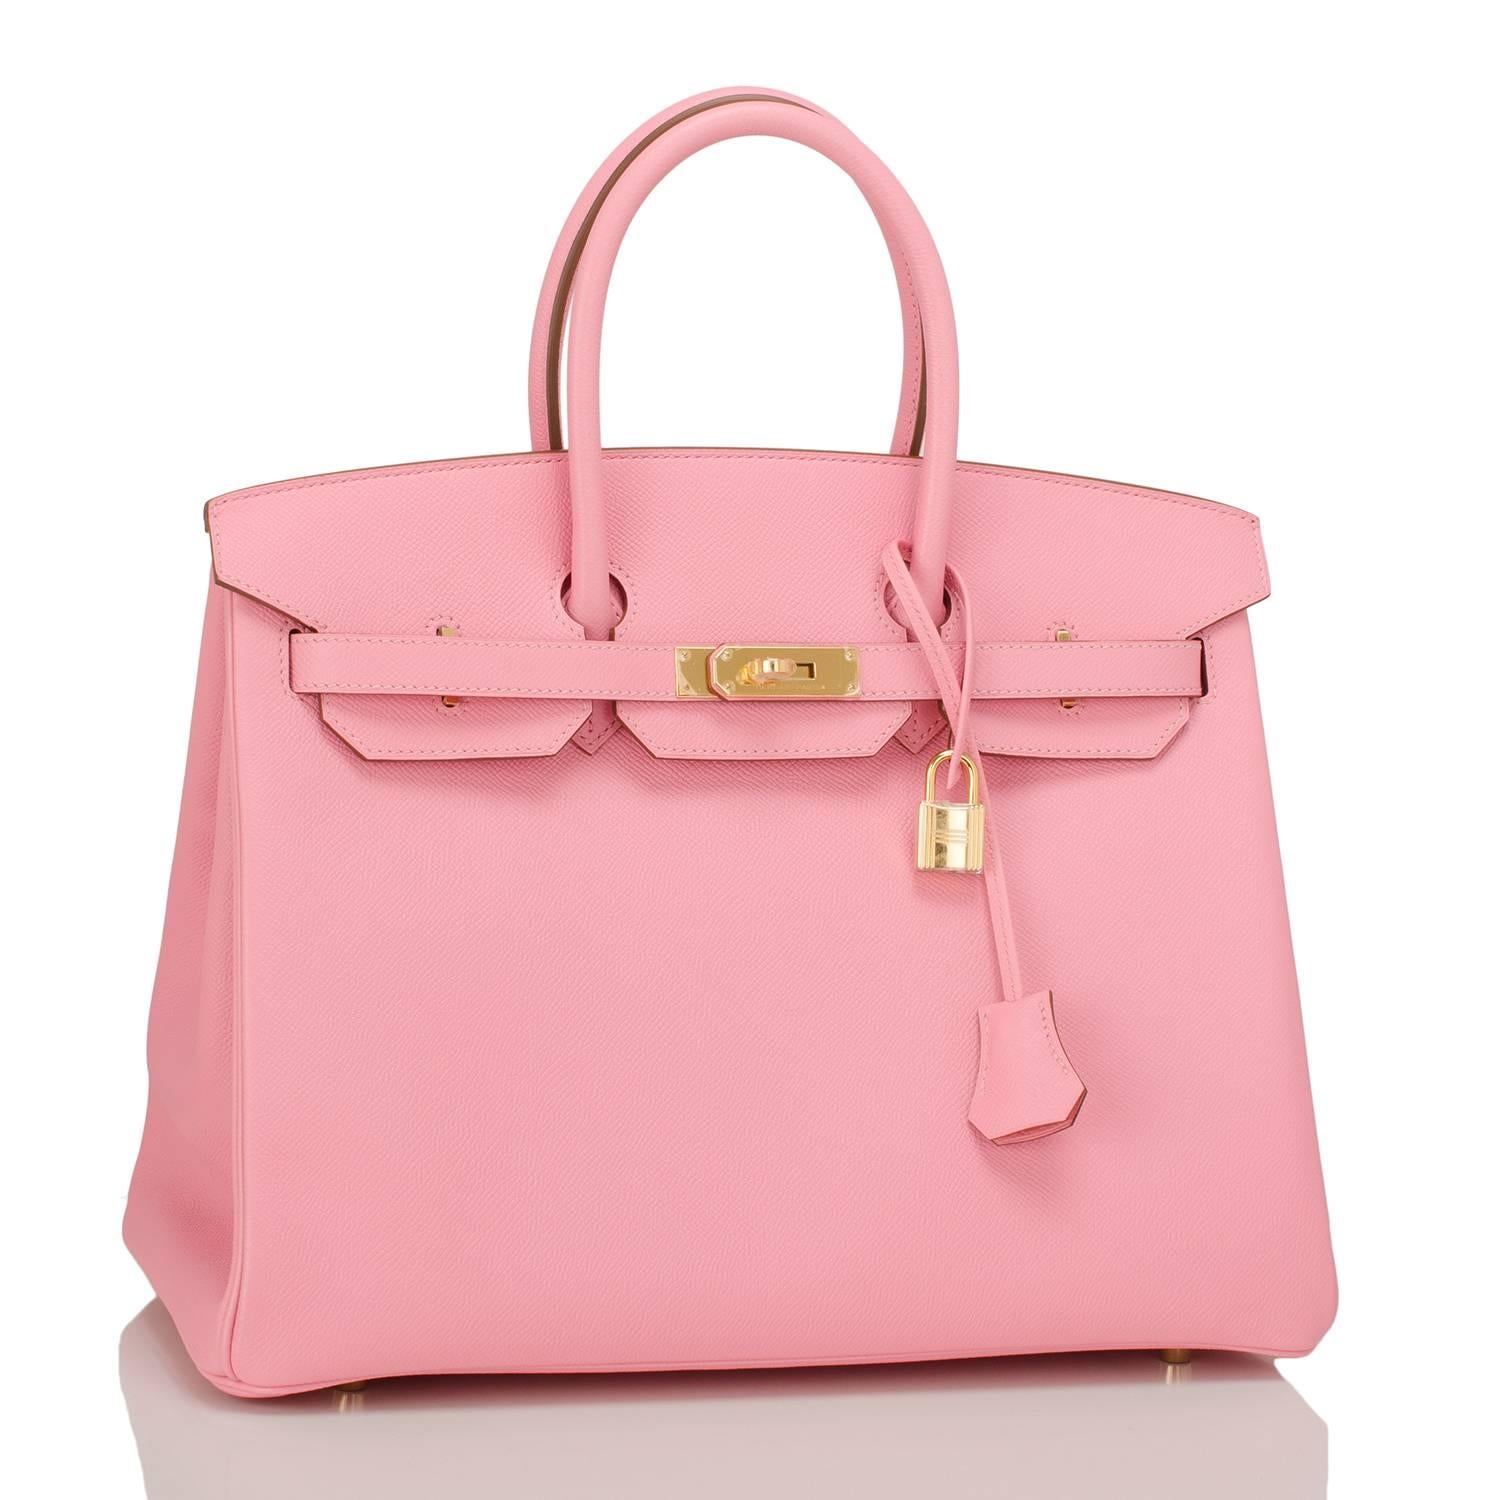 Hermes Rose Confetti Birkin 35cm in epsom leather with gold hardware.

This Birkin features tonal stitching, front toggle closure, clochette with lock and two keys, and double rolled handles. Interior is lined in Rose Confetti chevre with one zip